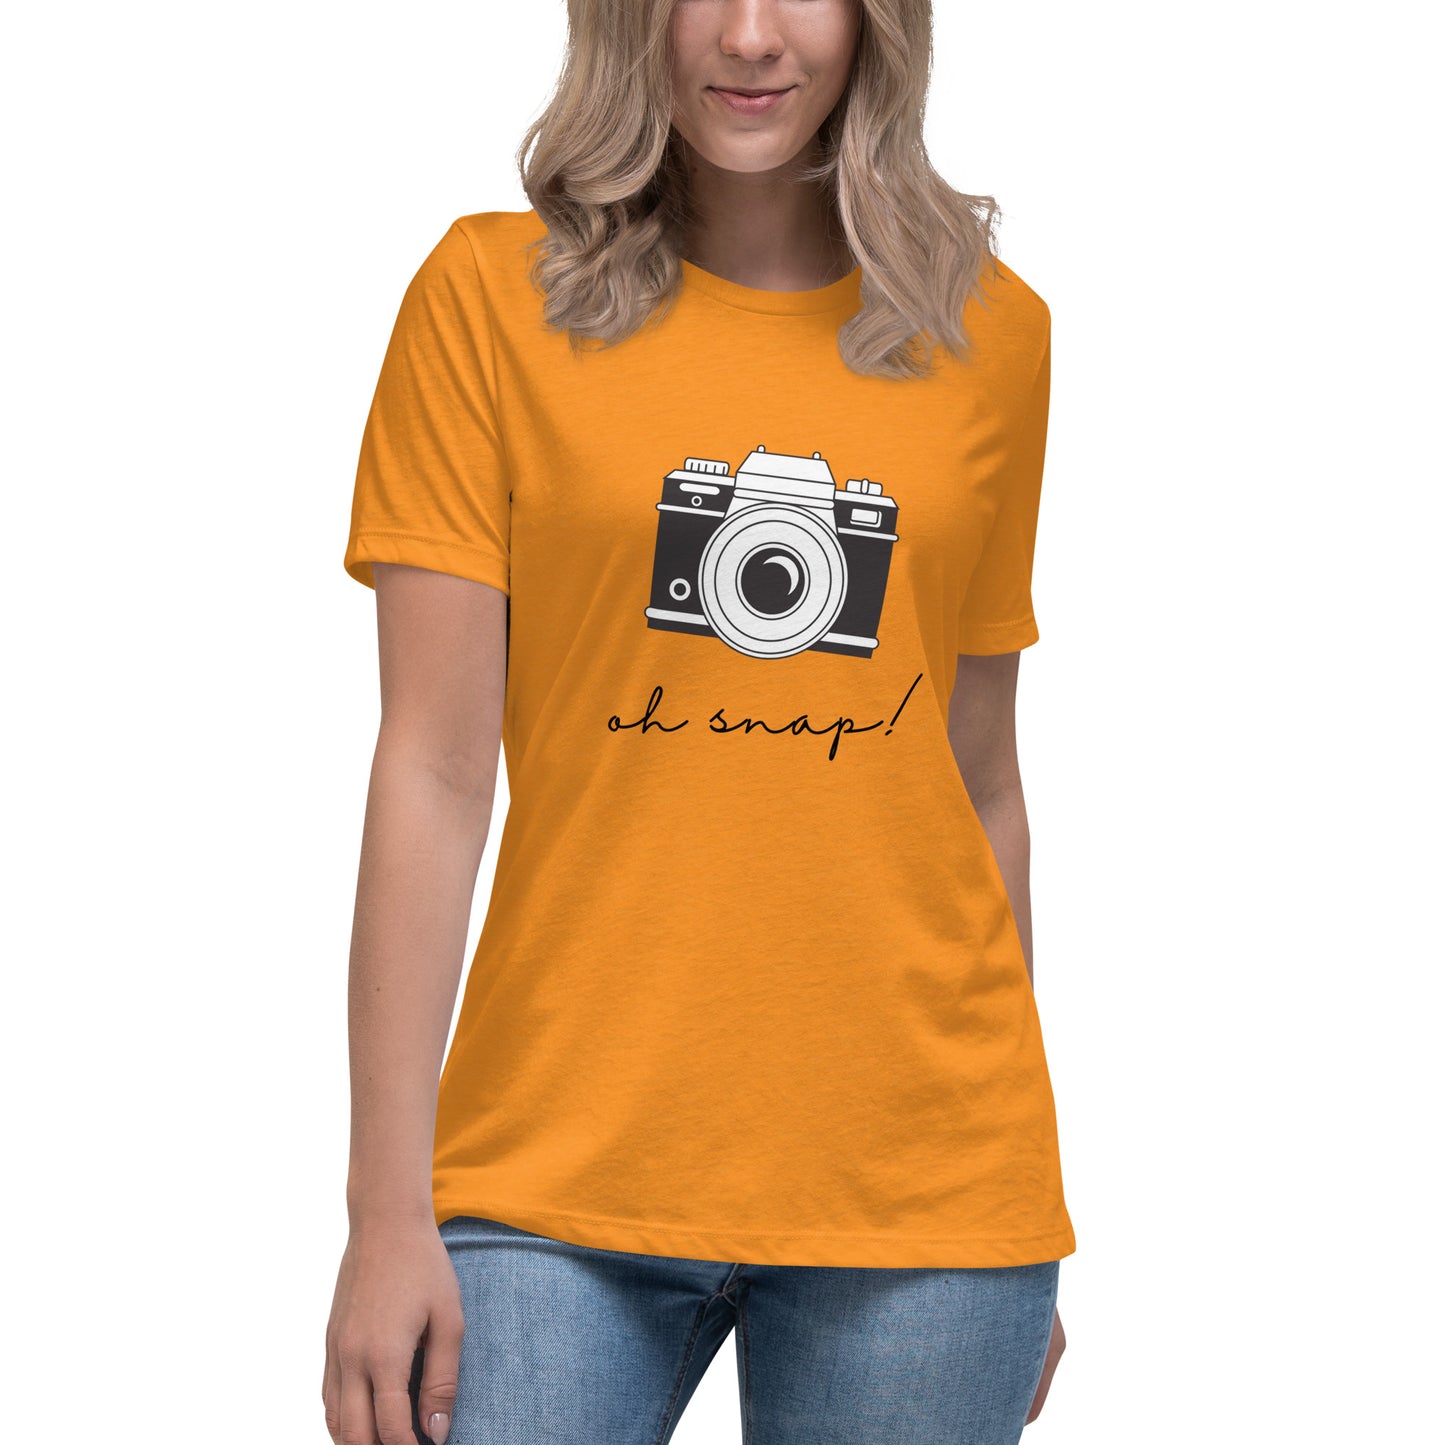 Oh Snap (black print) Women's Relaxed T-Shirt